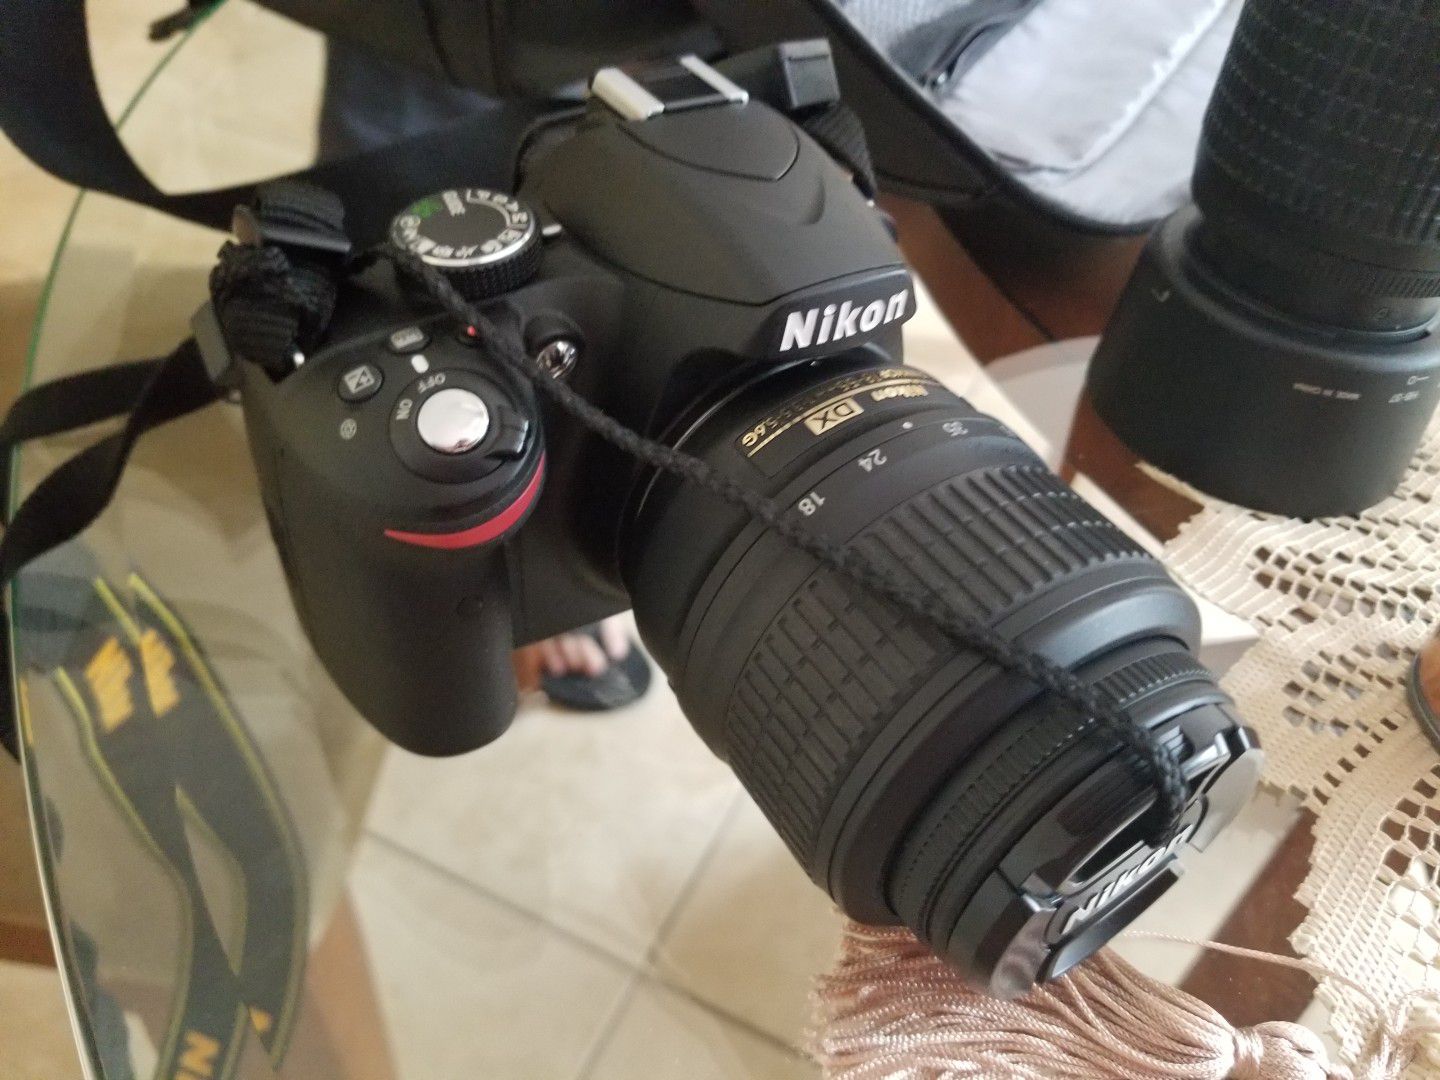 Nikon d3200 with carrying case and extra lens